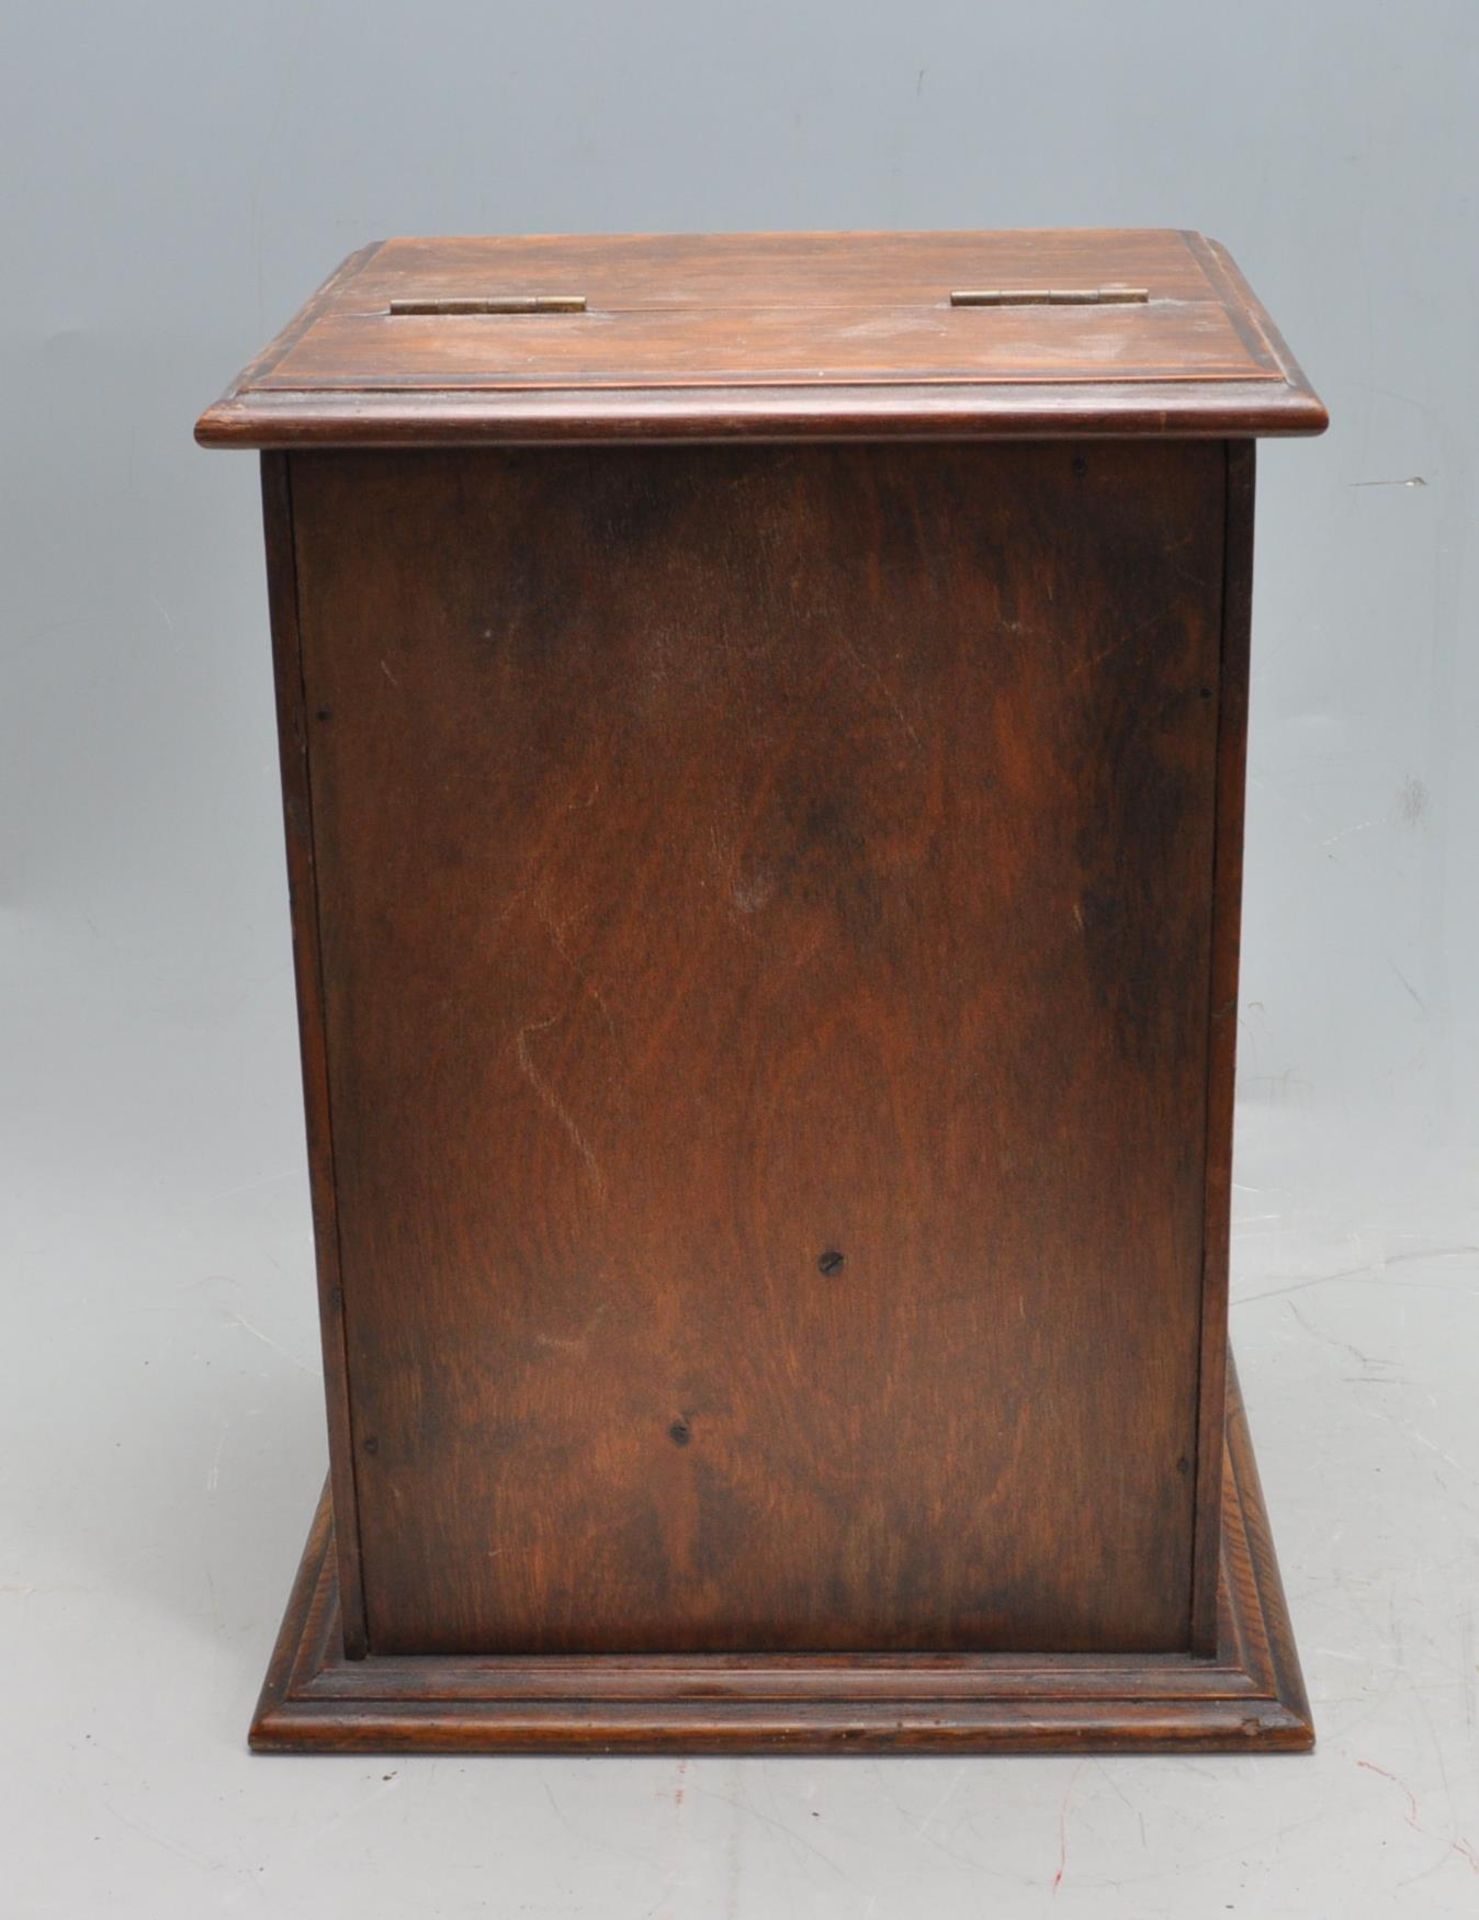 19TH CENTURY VICTORIAN OAK SMOKERS CABINET COMPLETE WITH PIPES, TOBACCO JAR, LIGHTER AND TOOLS - Image 5 of 6